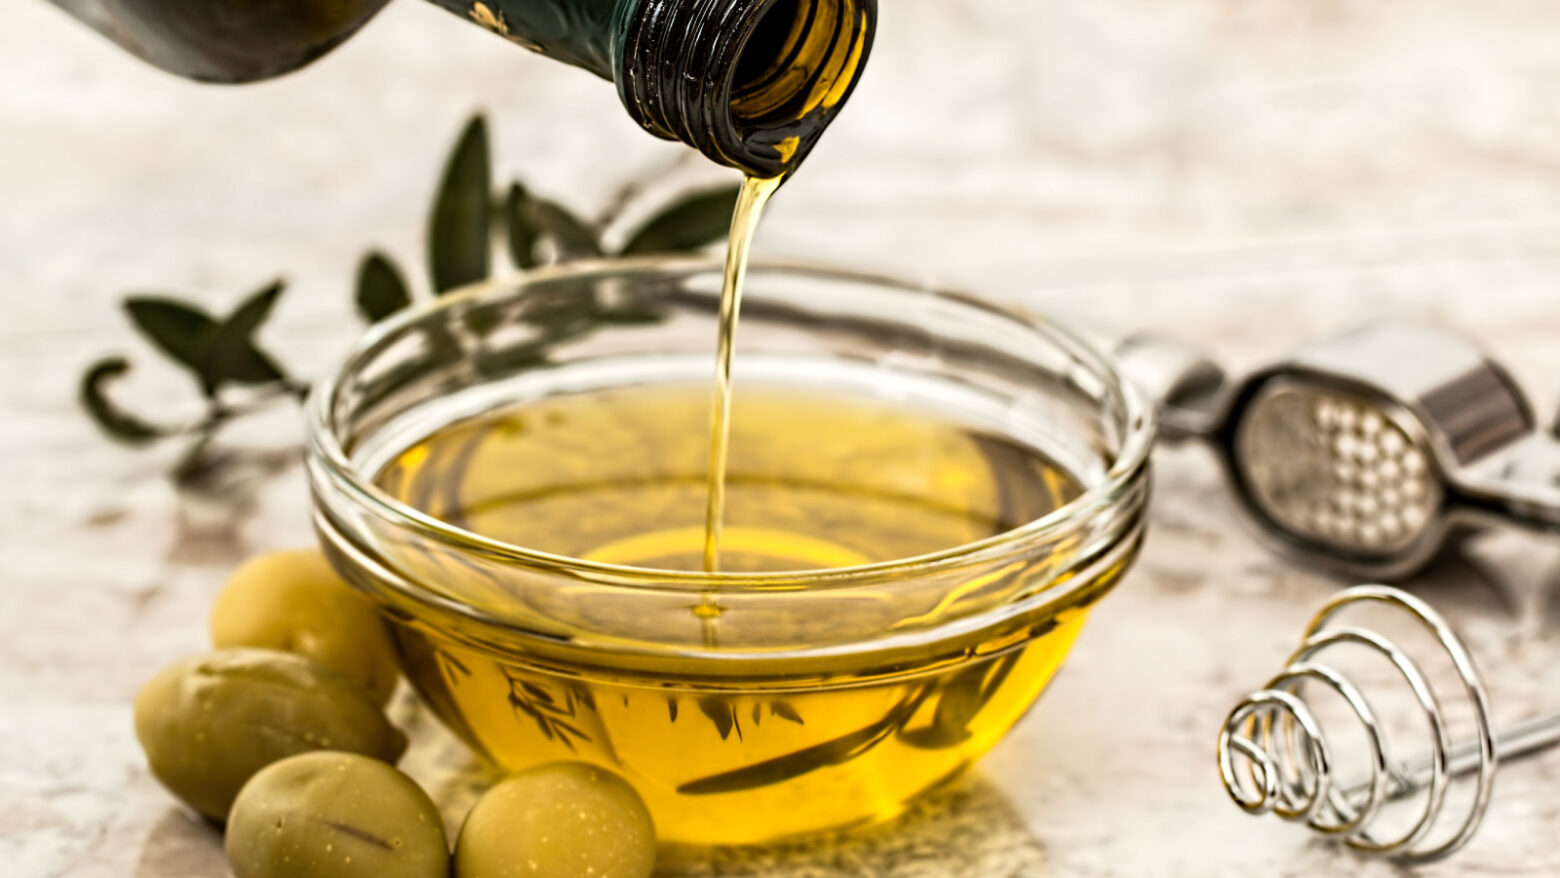 Olive oil being poured into a small glass bowl